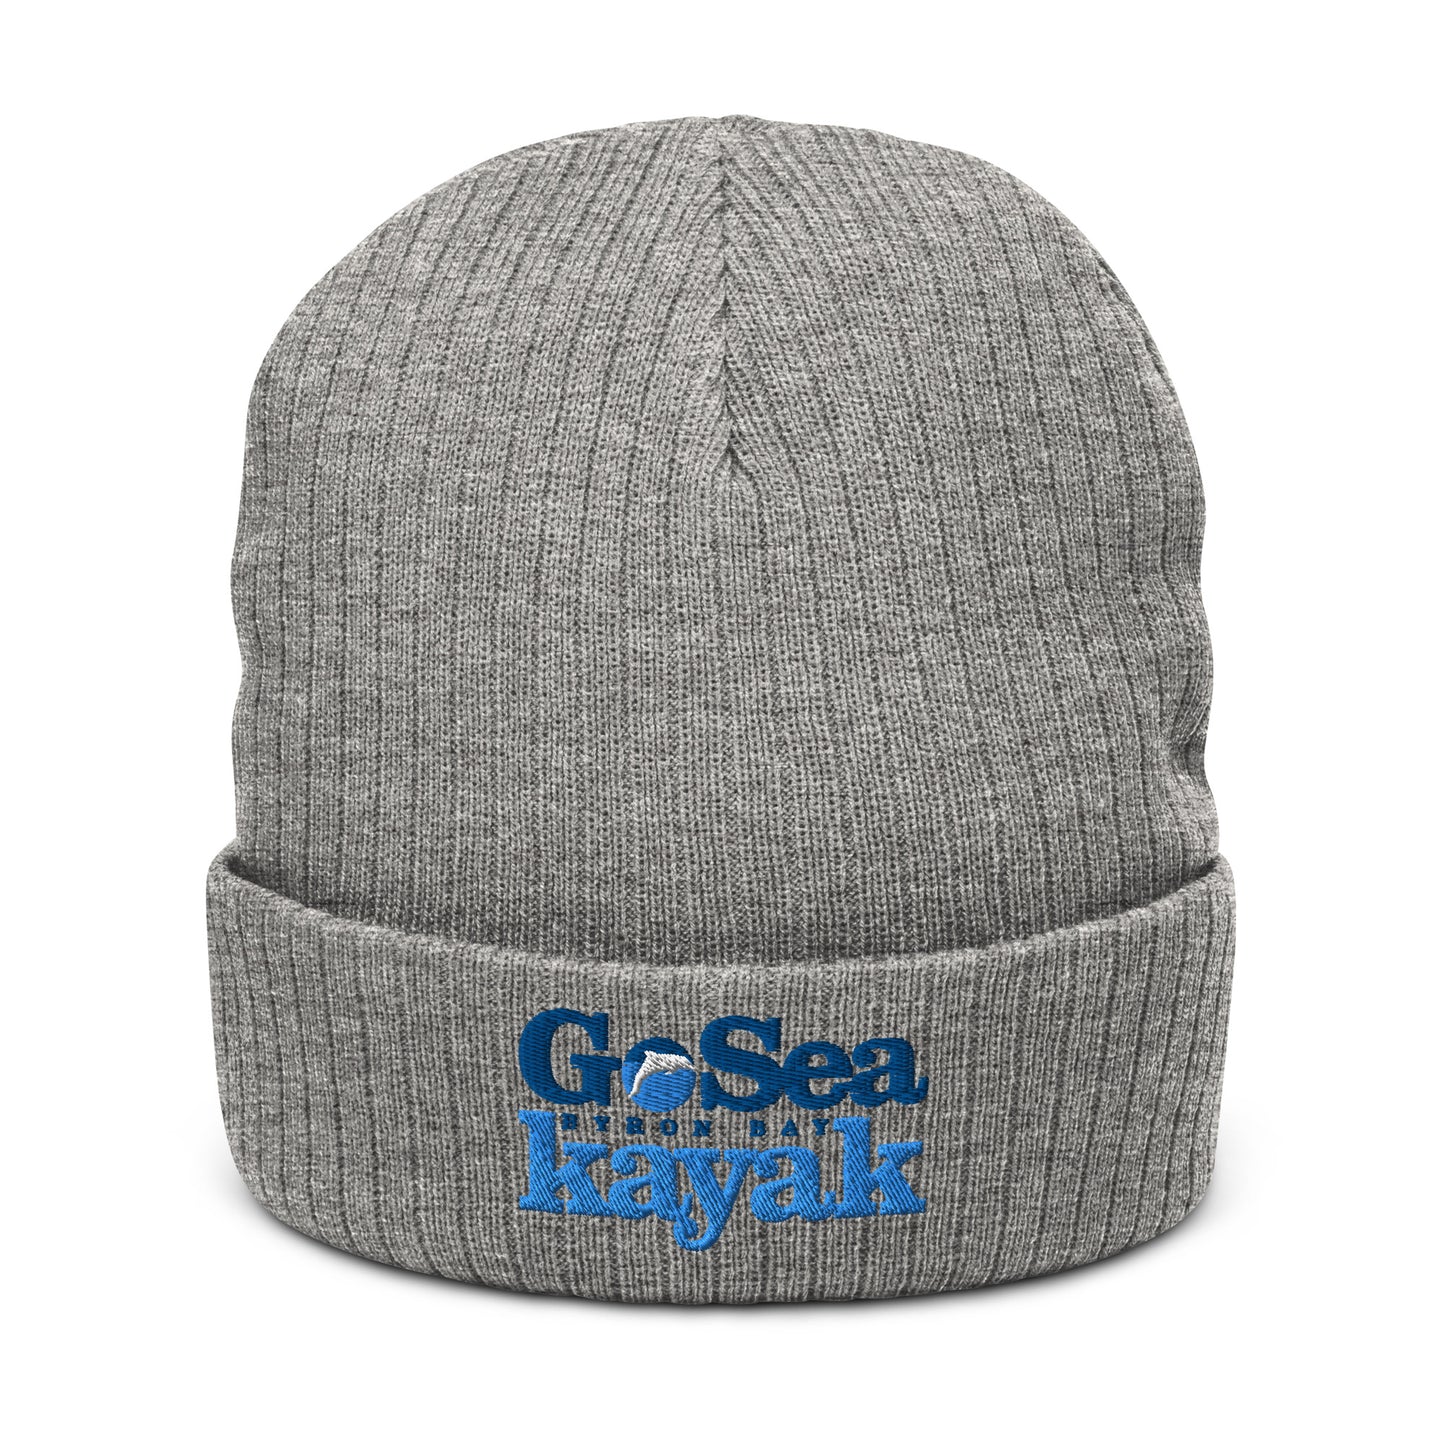  Ribbed Knit Beanie - Recycled polyester - Light Grey - Front view - Go Sea Kayak Byron Bay logo on front - Genuine Byron Bay Merchandise | Produced by Go Sea Kayak Byron Bay 